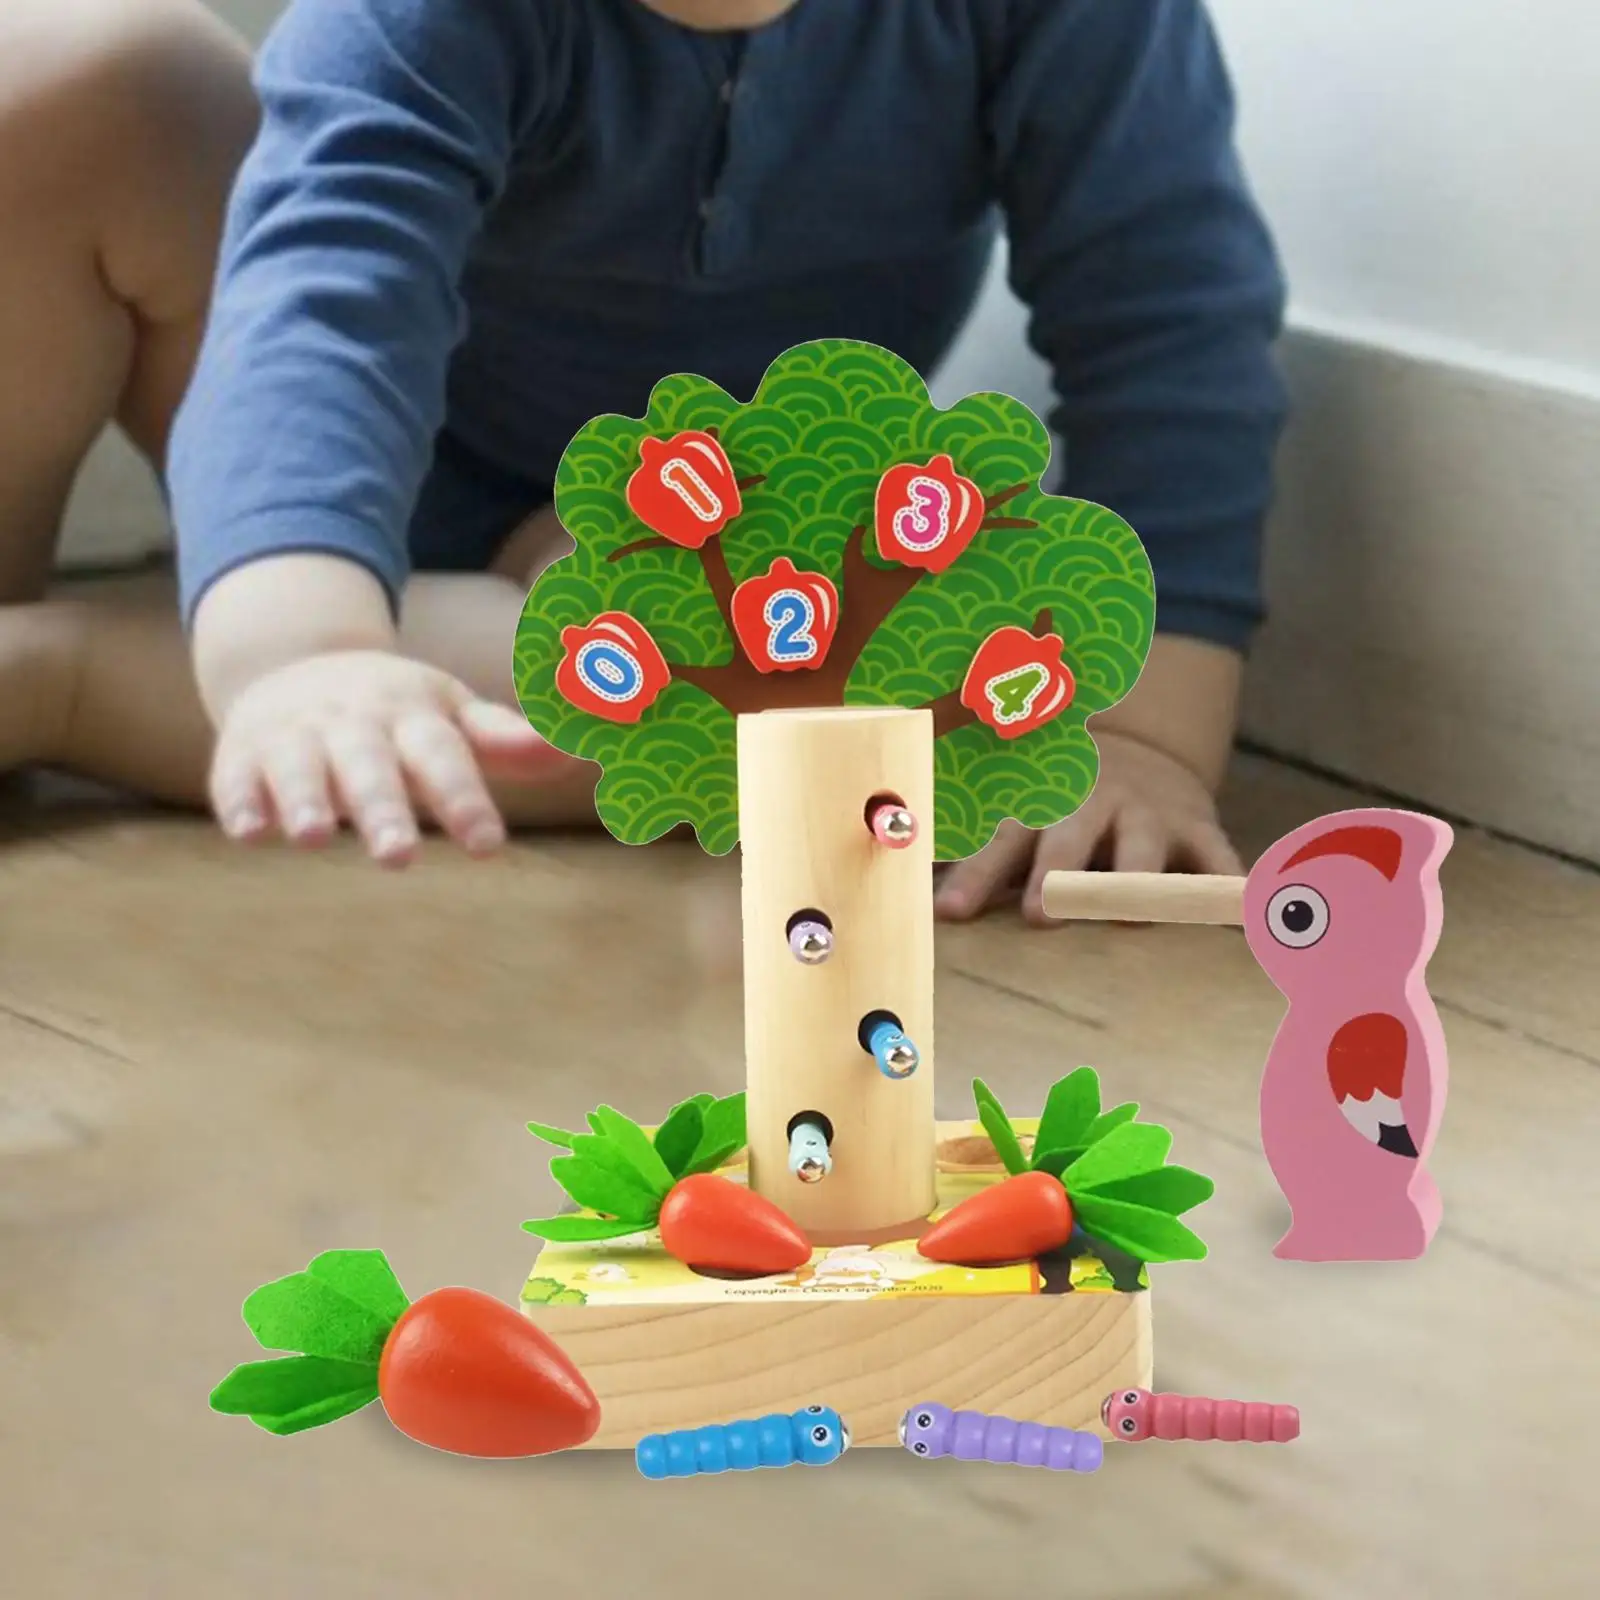 Apples Picking Magnetic Fruit Tree Toy Early Learning Carrot Harvest Game Wooden Color Shape Sorting Game for Toddler Girls Boys